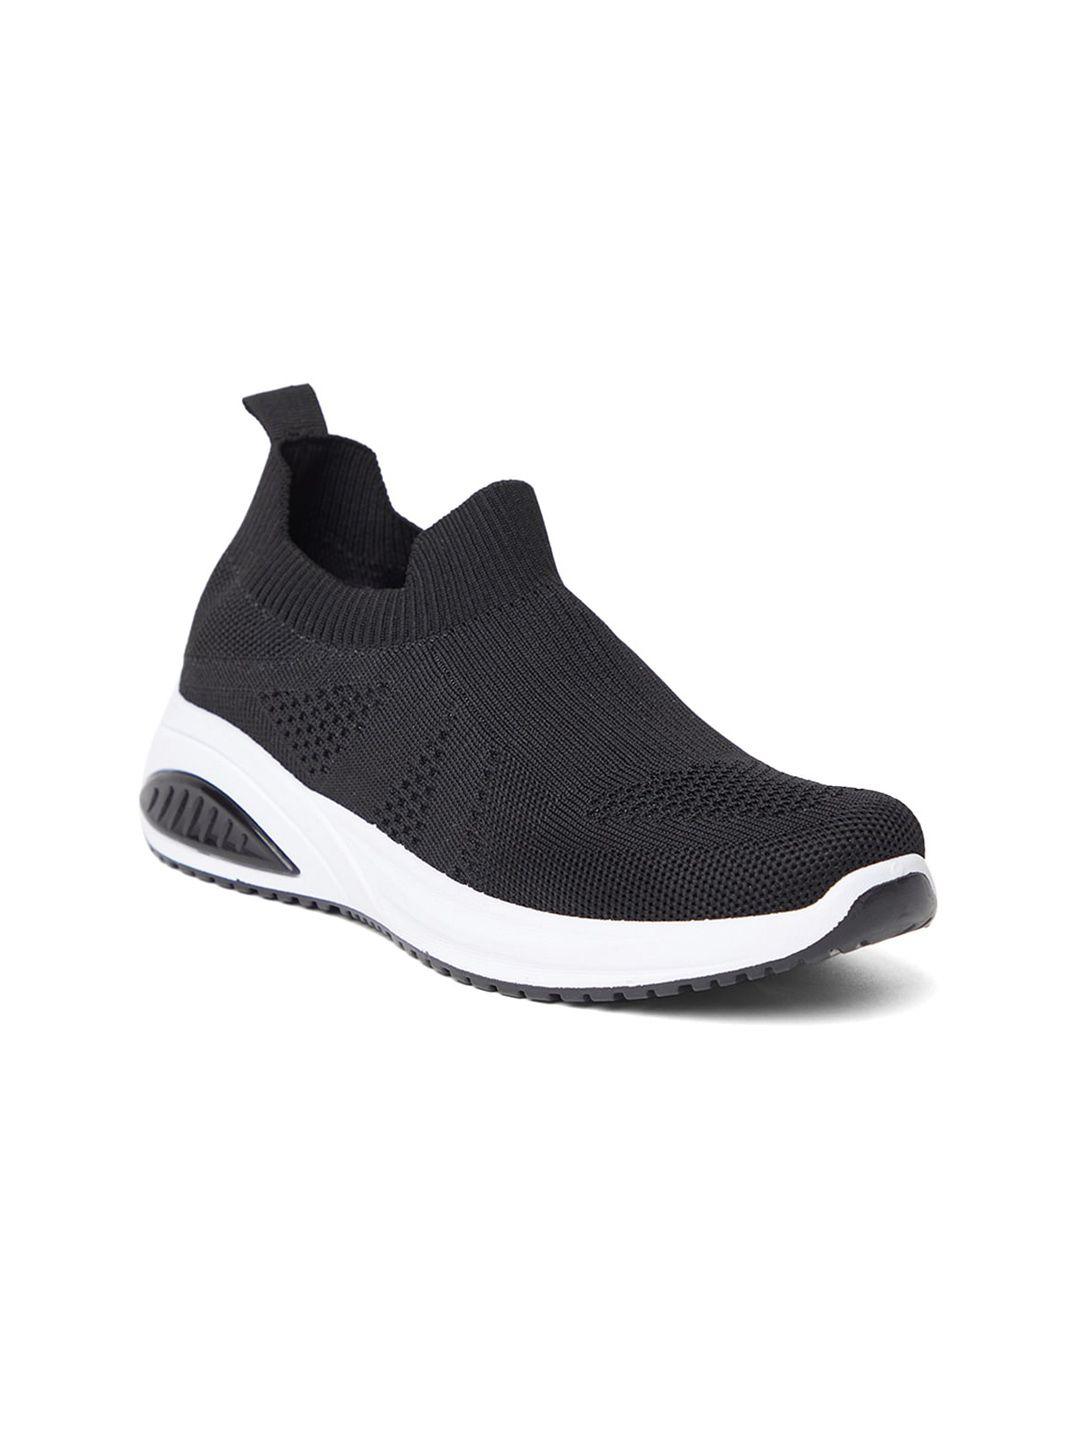 The Roadster Lifestyle Co. Women Black Textured Mesh Lightweight Slip-On Sneakers